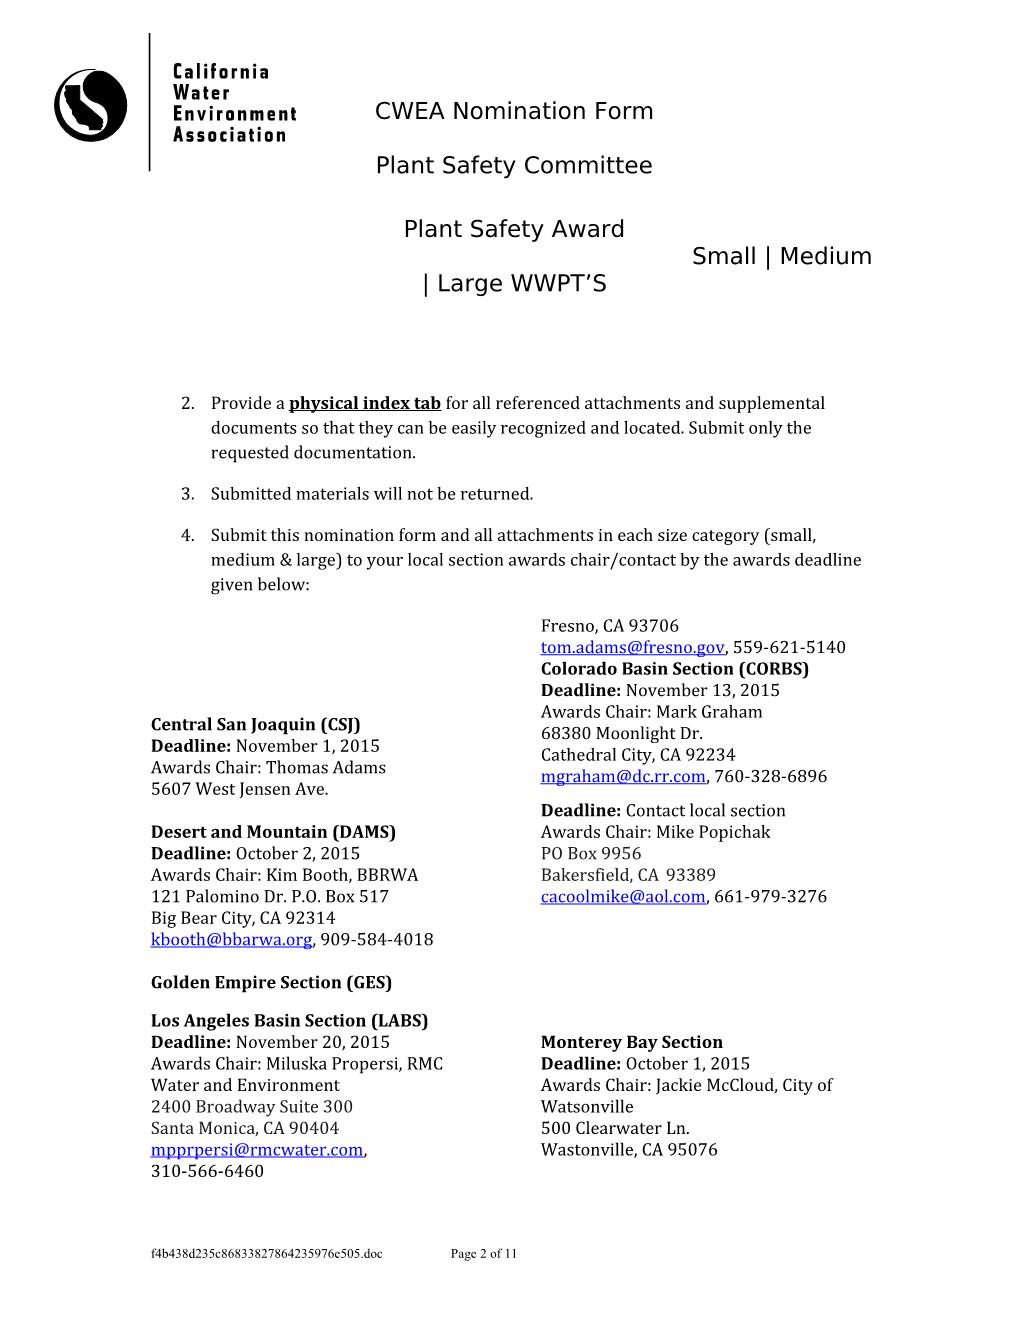 Plant Safety Committee